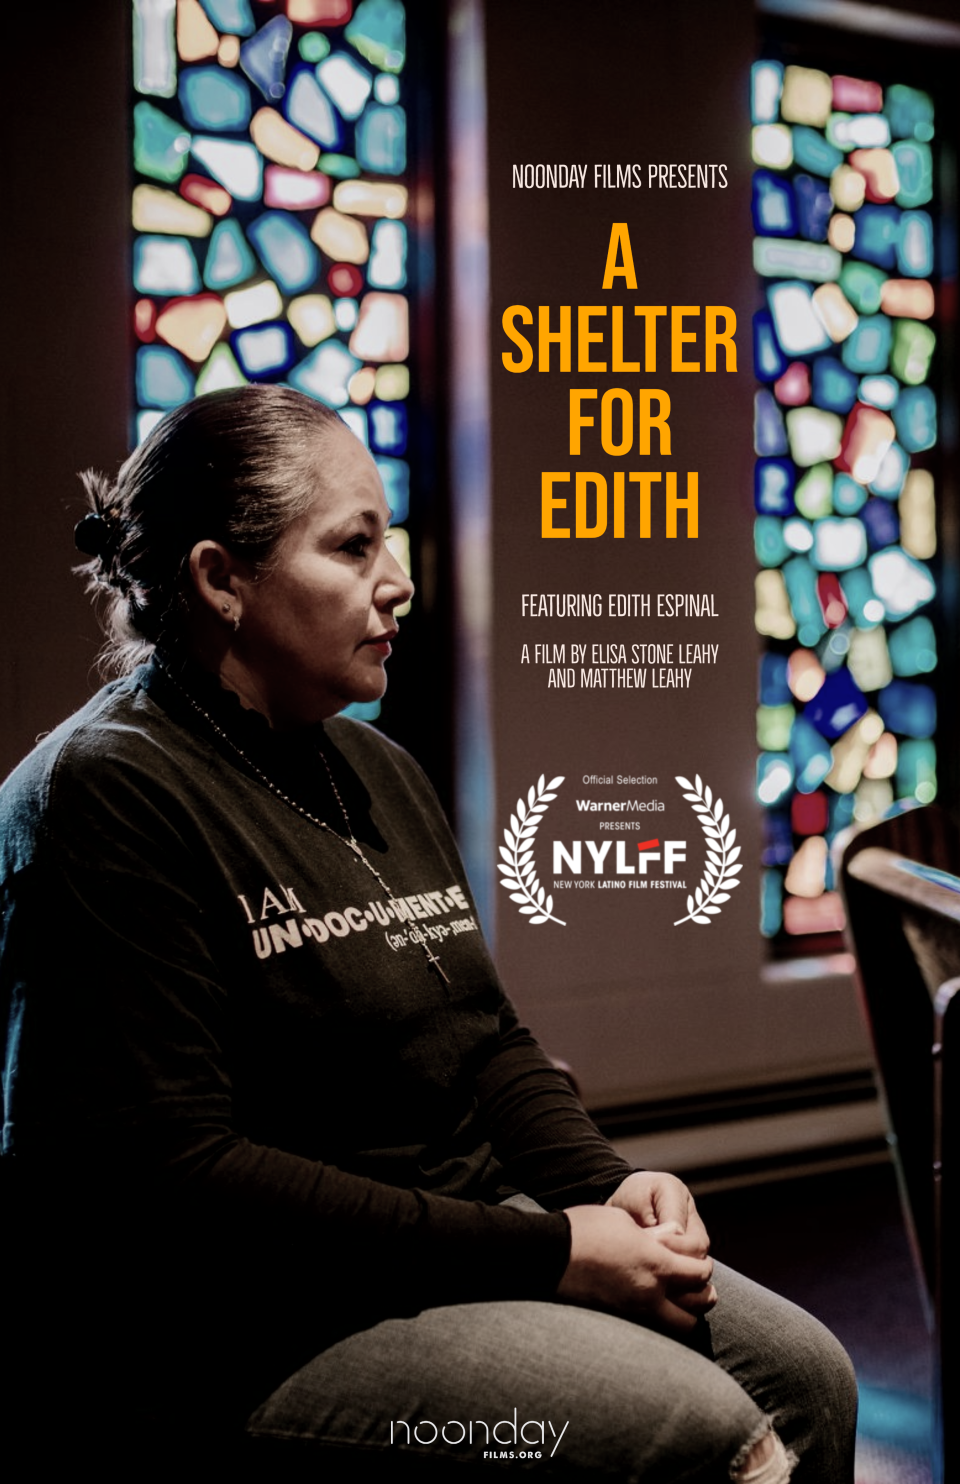 The poster for the documentary "A Shelter for Edith," releasing Sept. 18, 2021. The film details Edith Espinal's time seeking immigration sanctuary inside Columbus Mennonite Church.